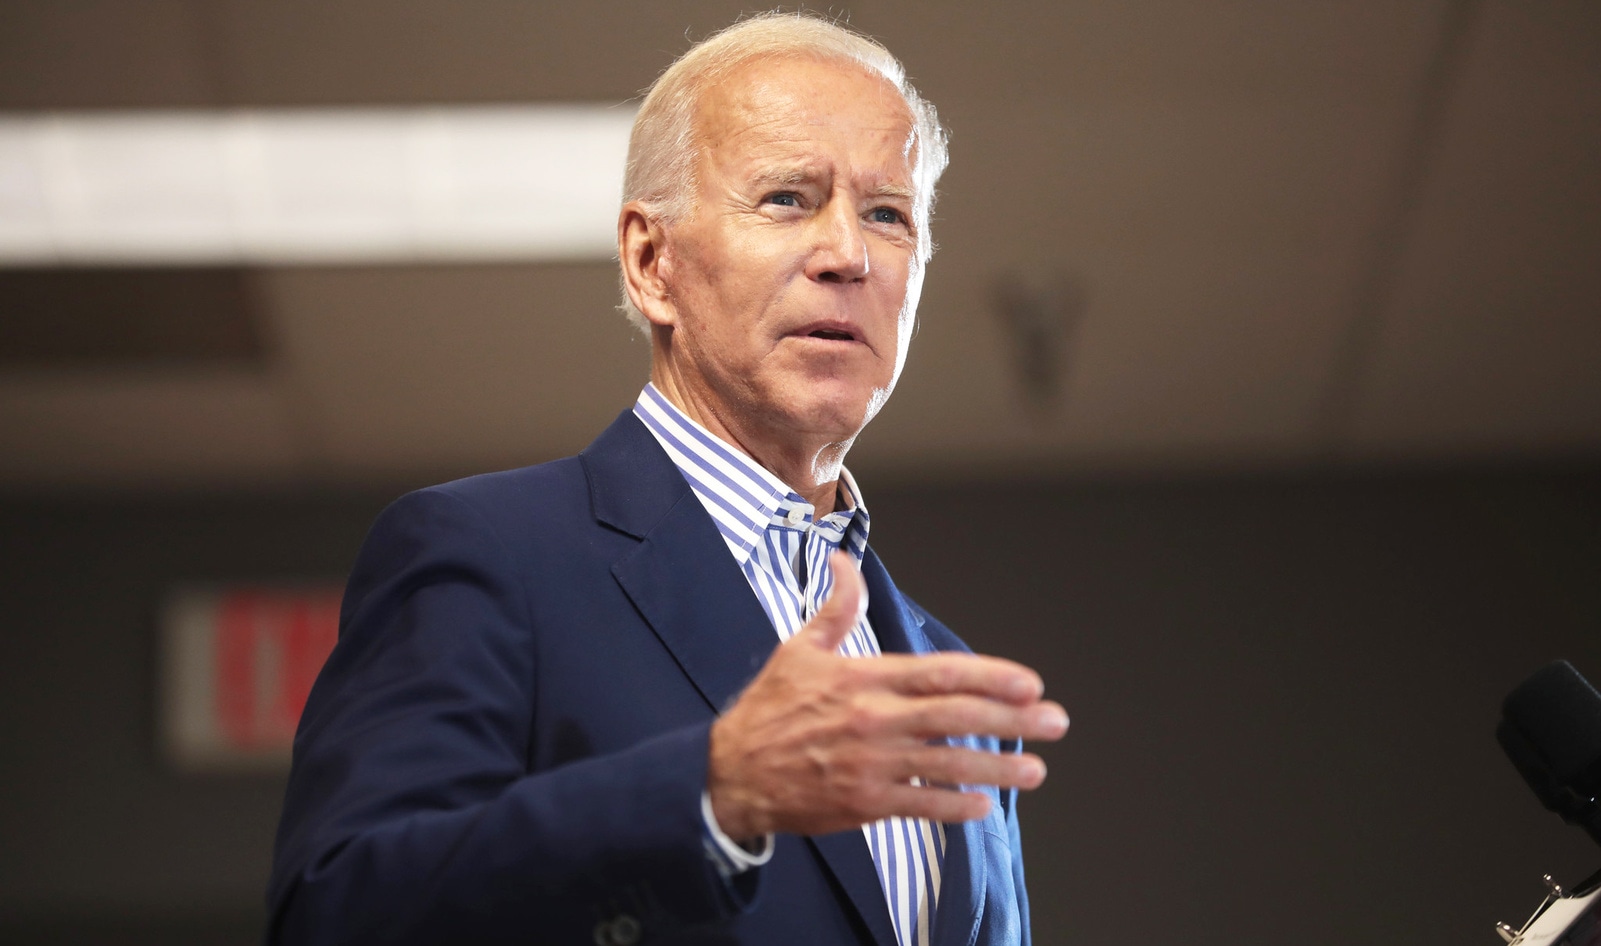 Biden Embraces Cultivated Meat and Food Tech in New Executive Order